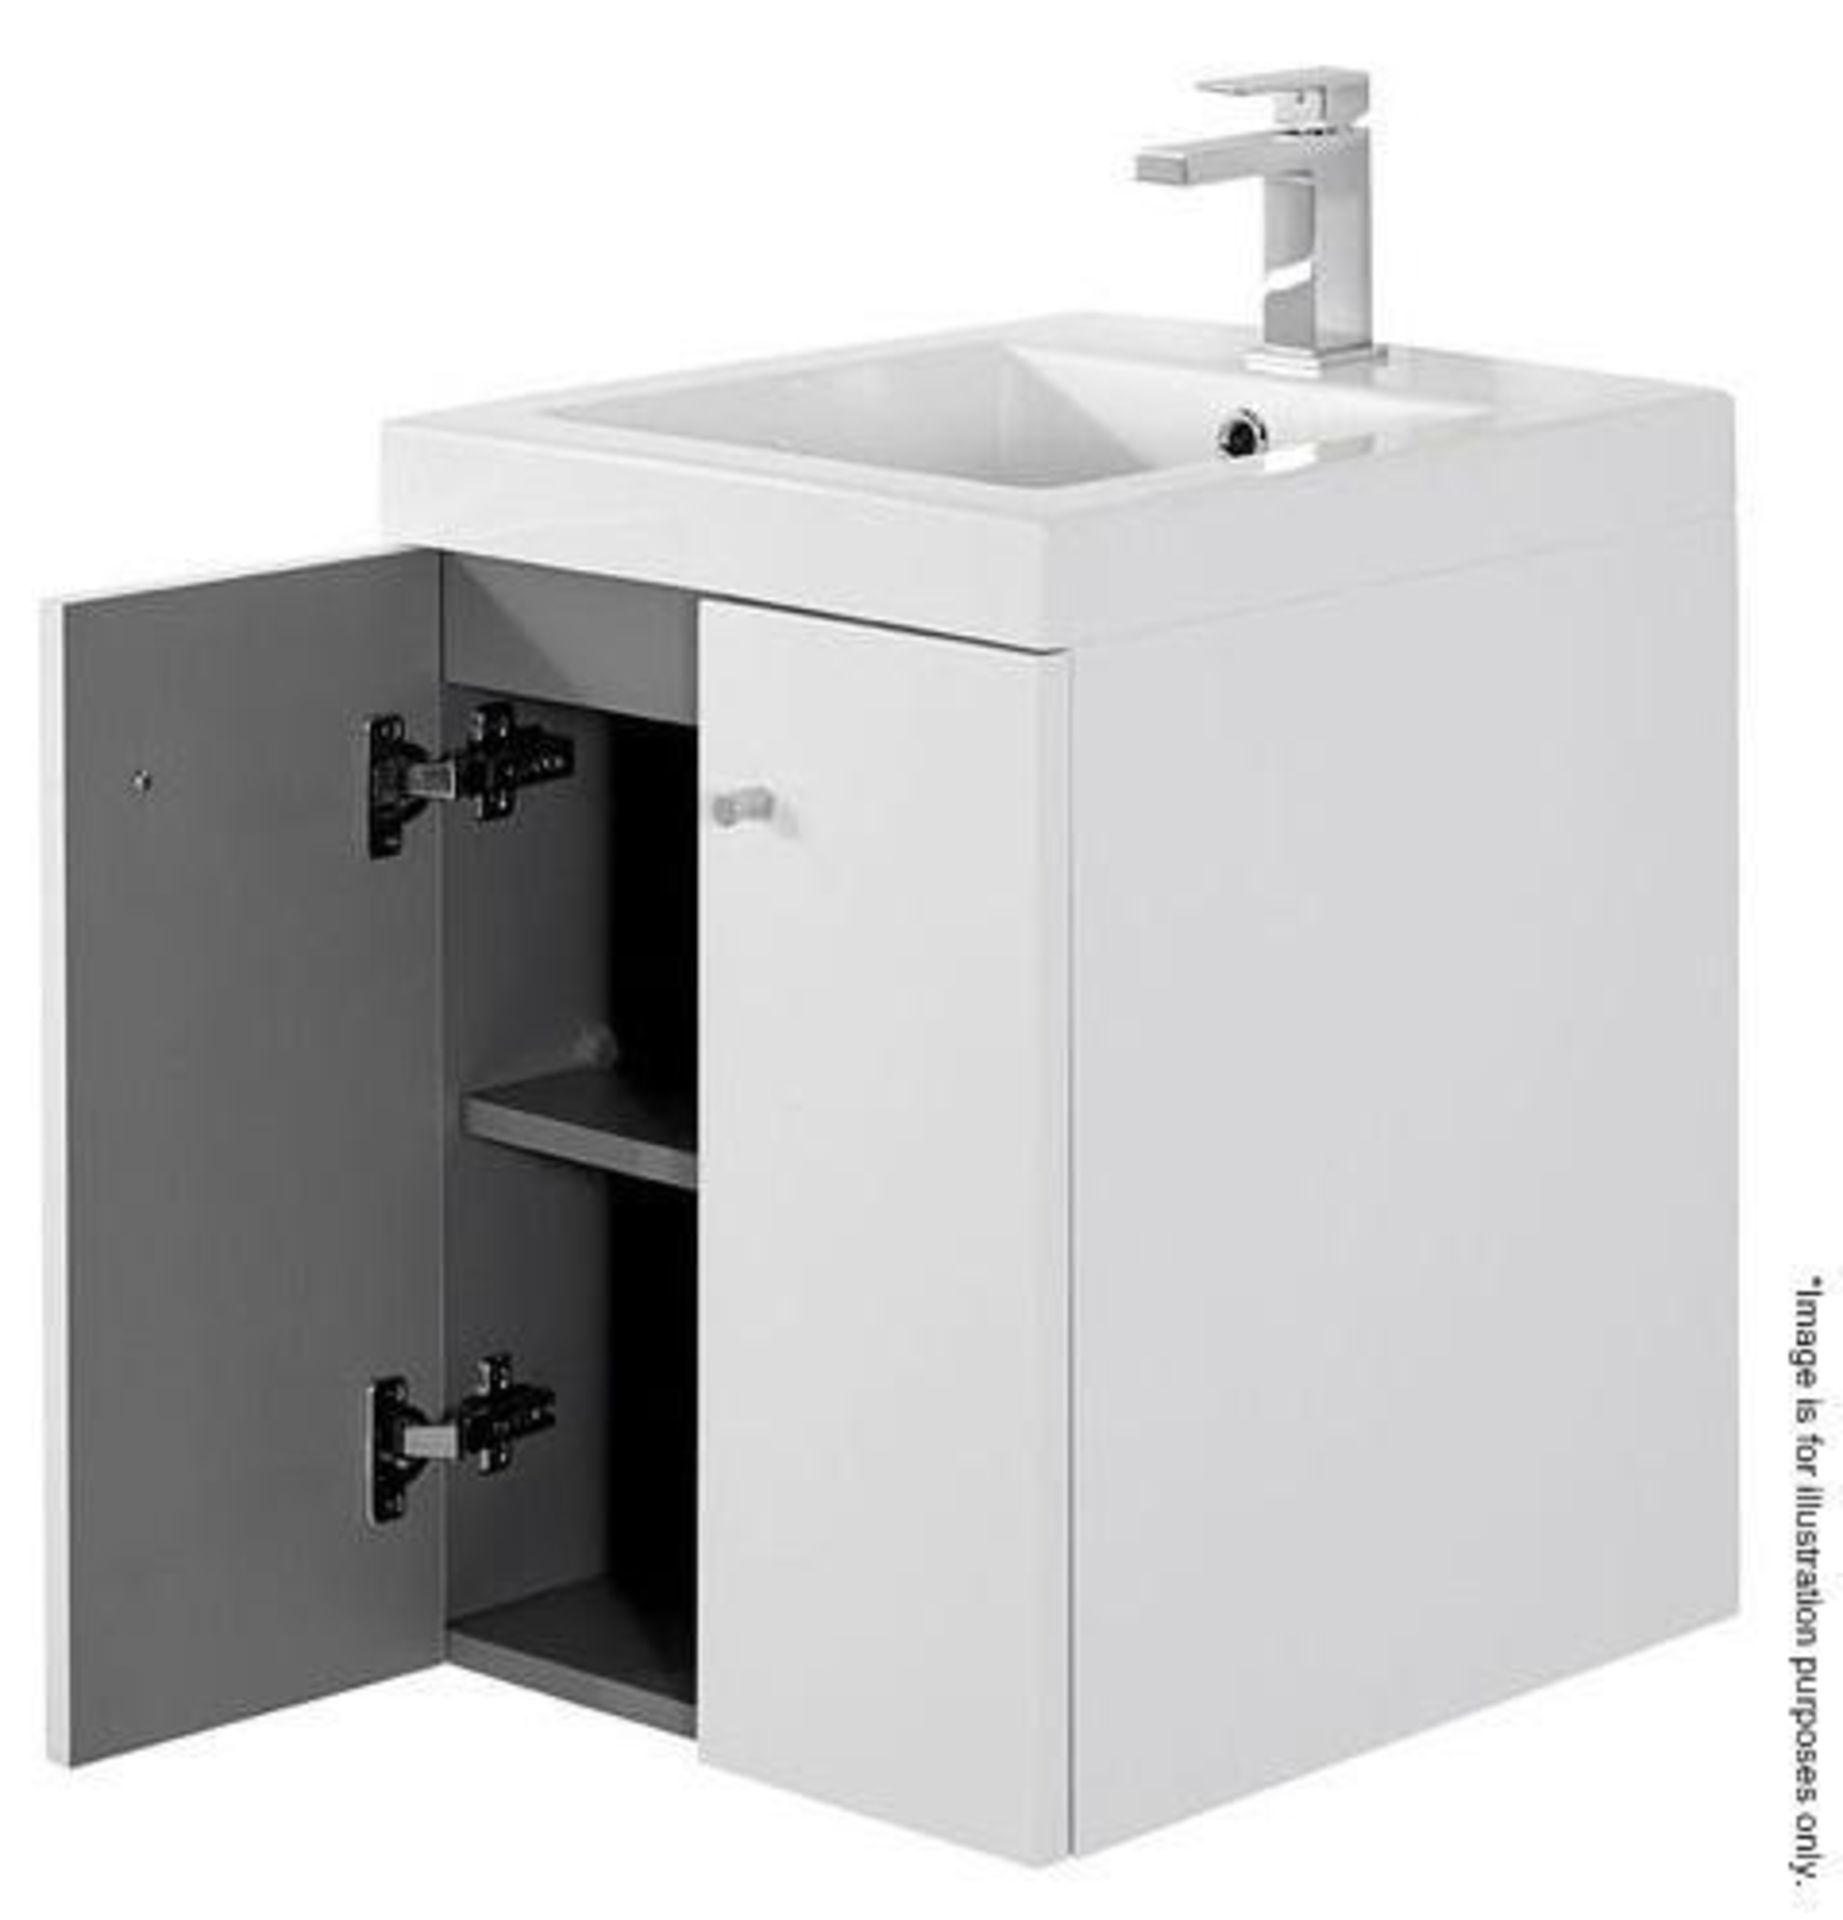 10 x Alpine Duo 400 Wall Hung Vanity Units In Gloss White - Brand New Boxed Stock - Dimensions: H49 - Image 5 of 5